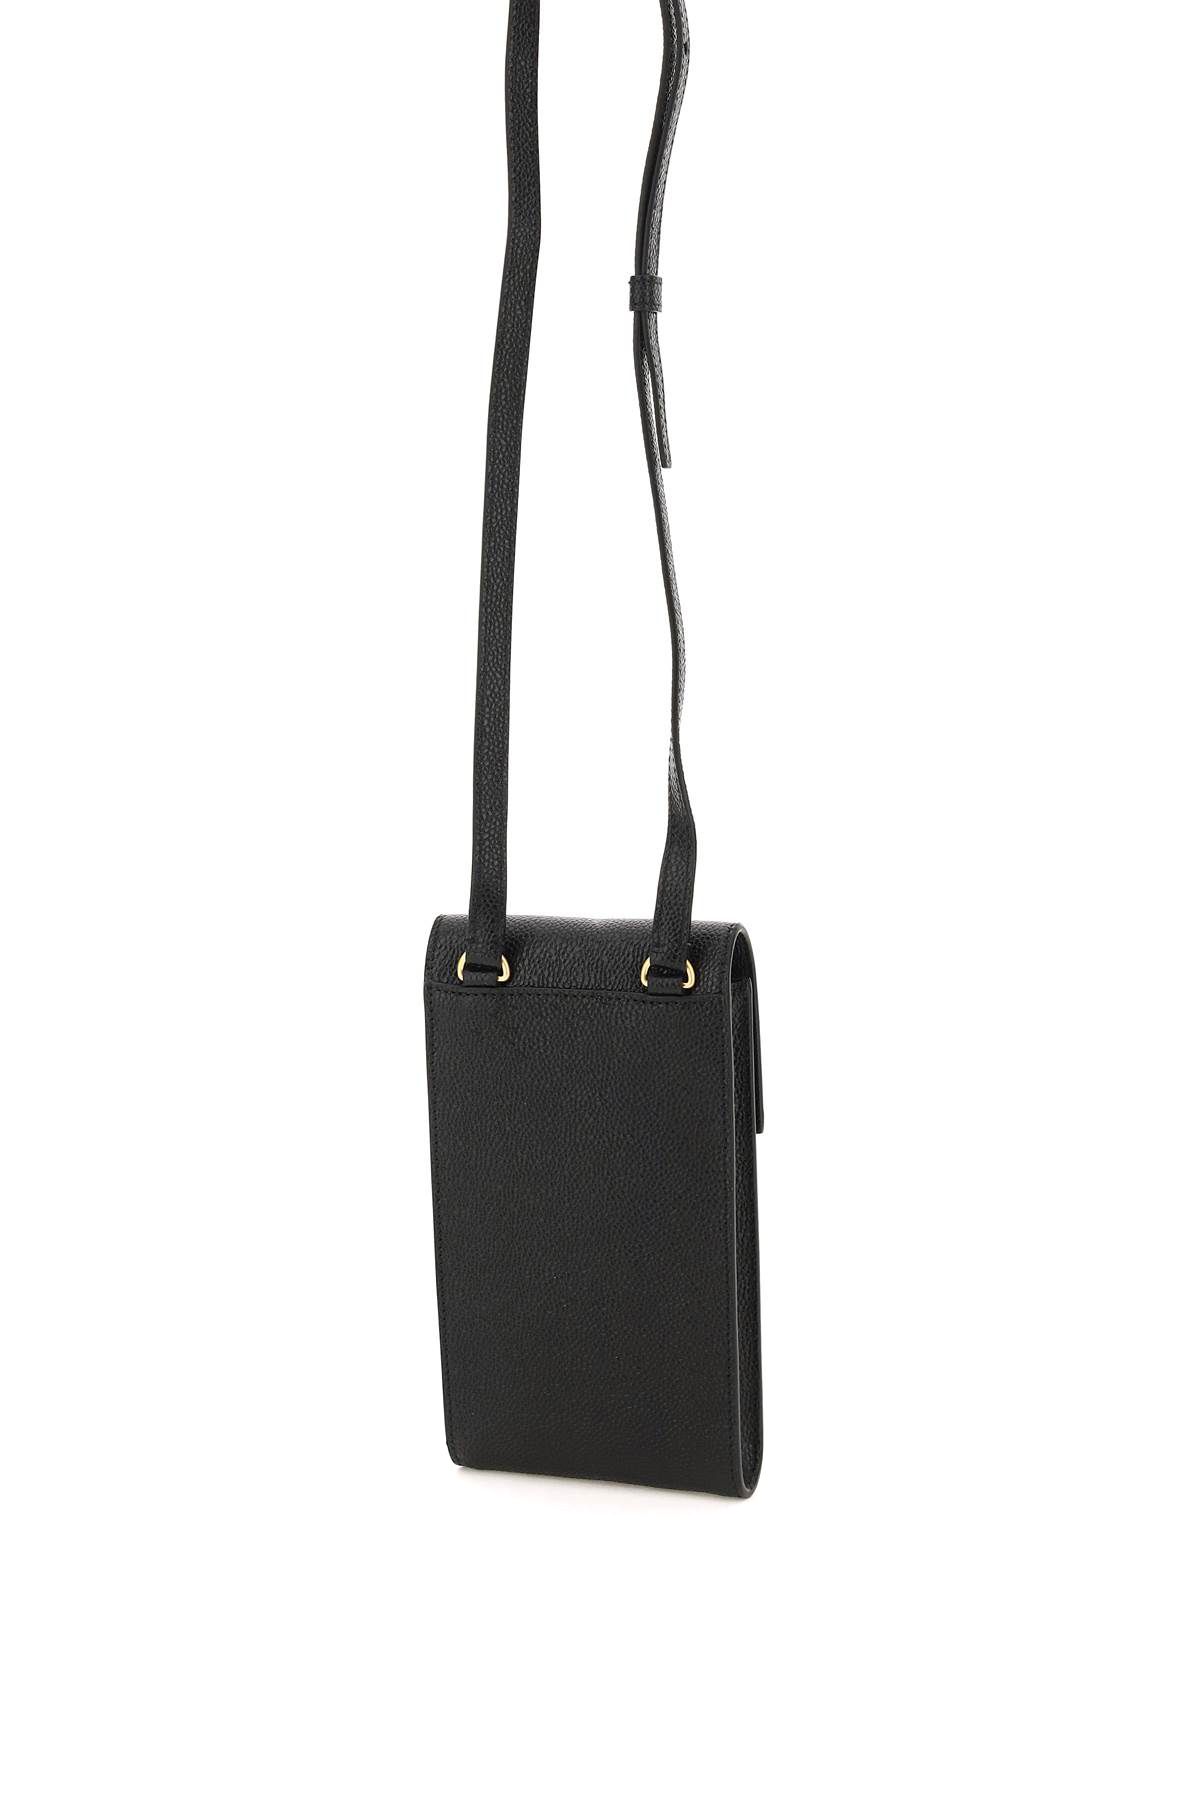 Shop Thom Browne Pebble Grain Leather Phone Holder With Strap In Black